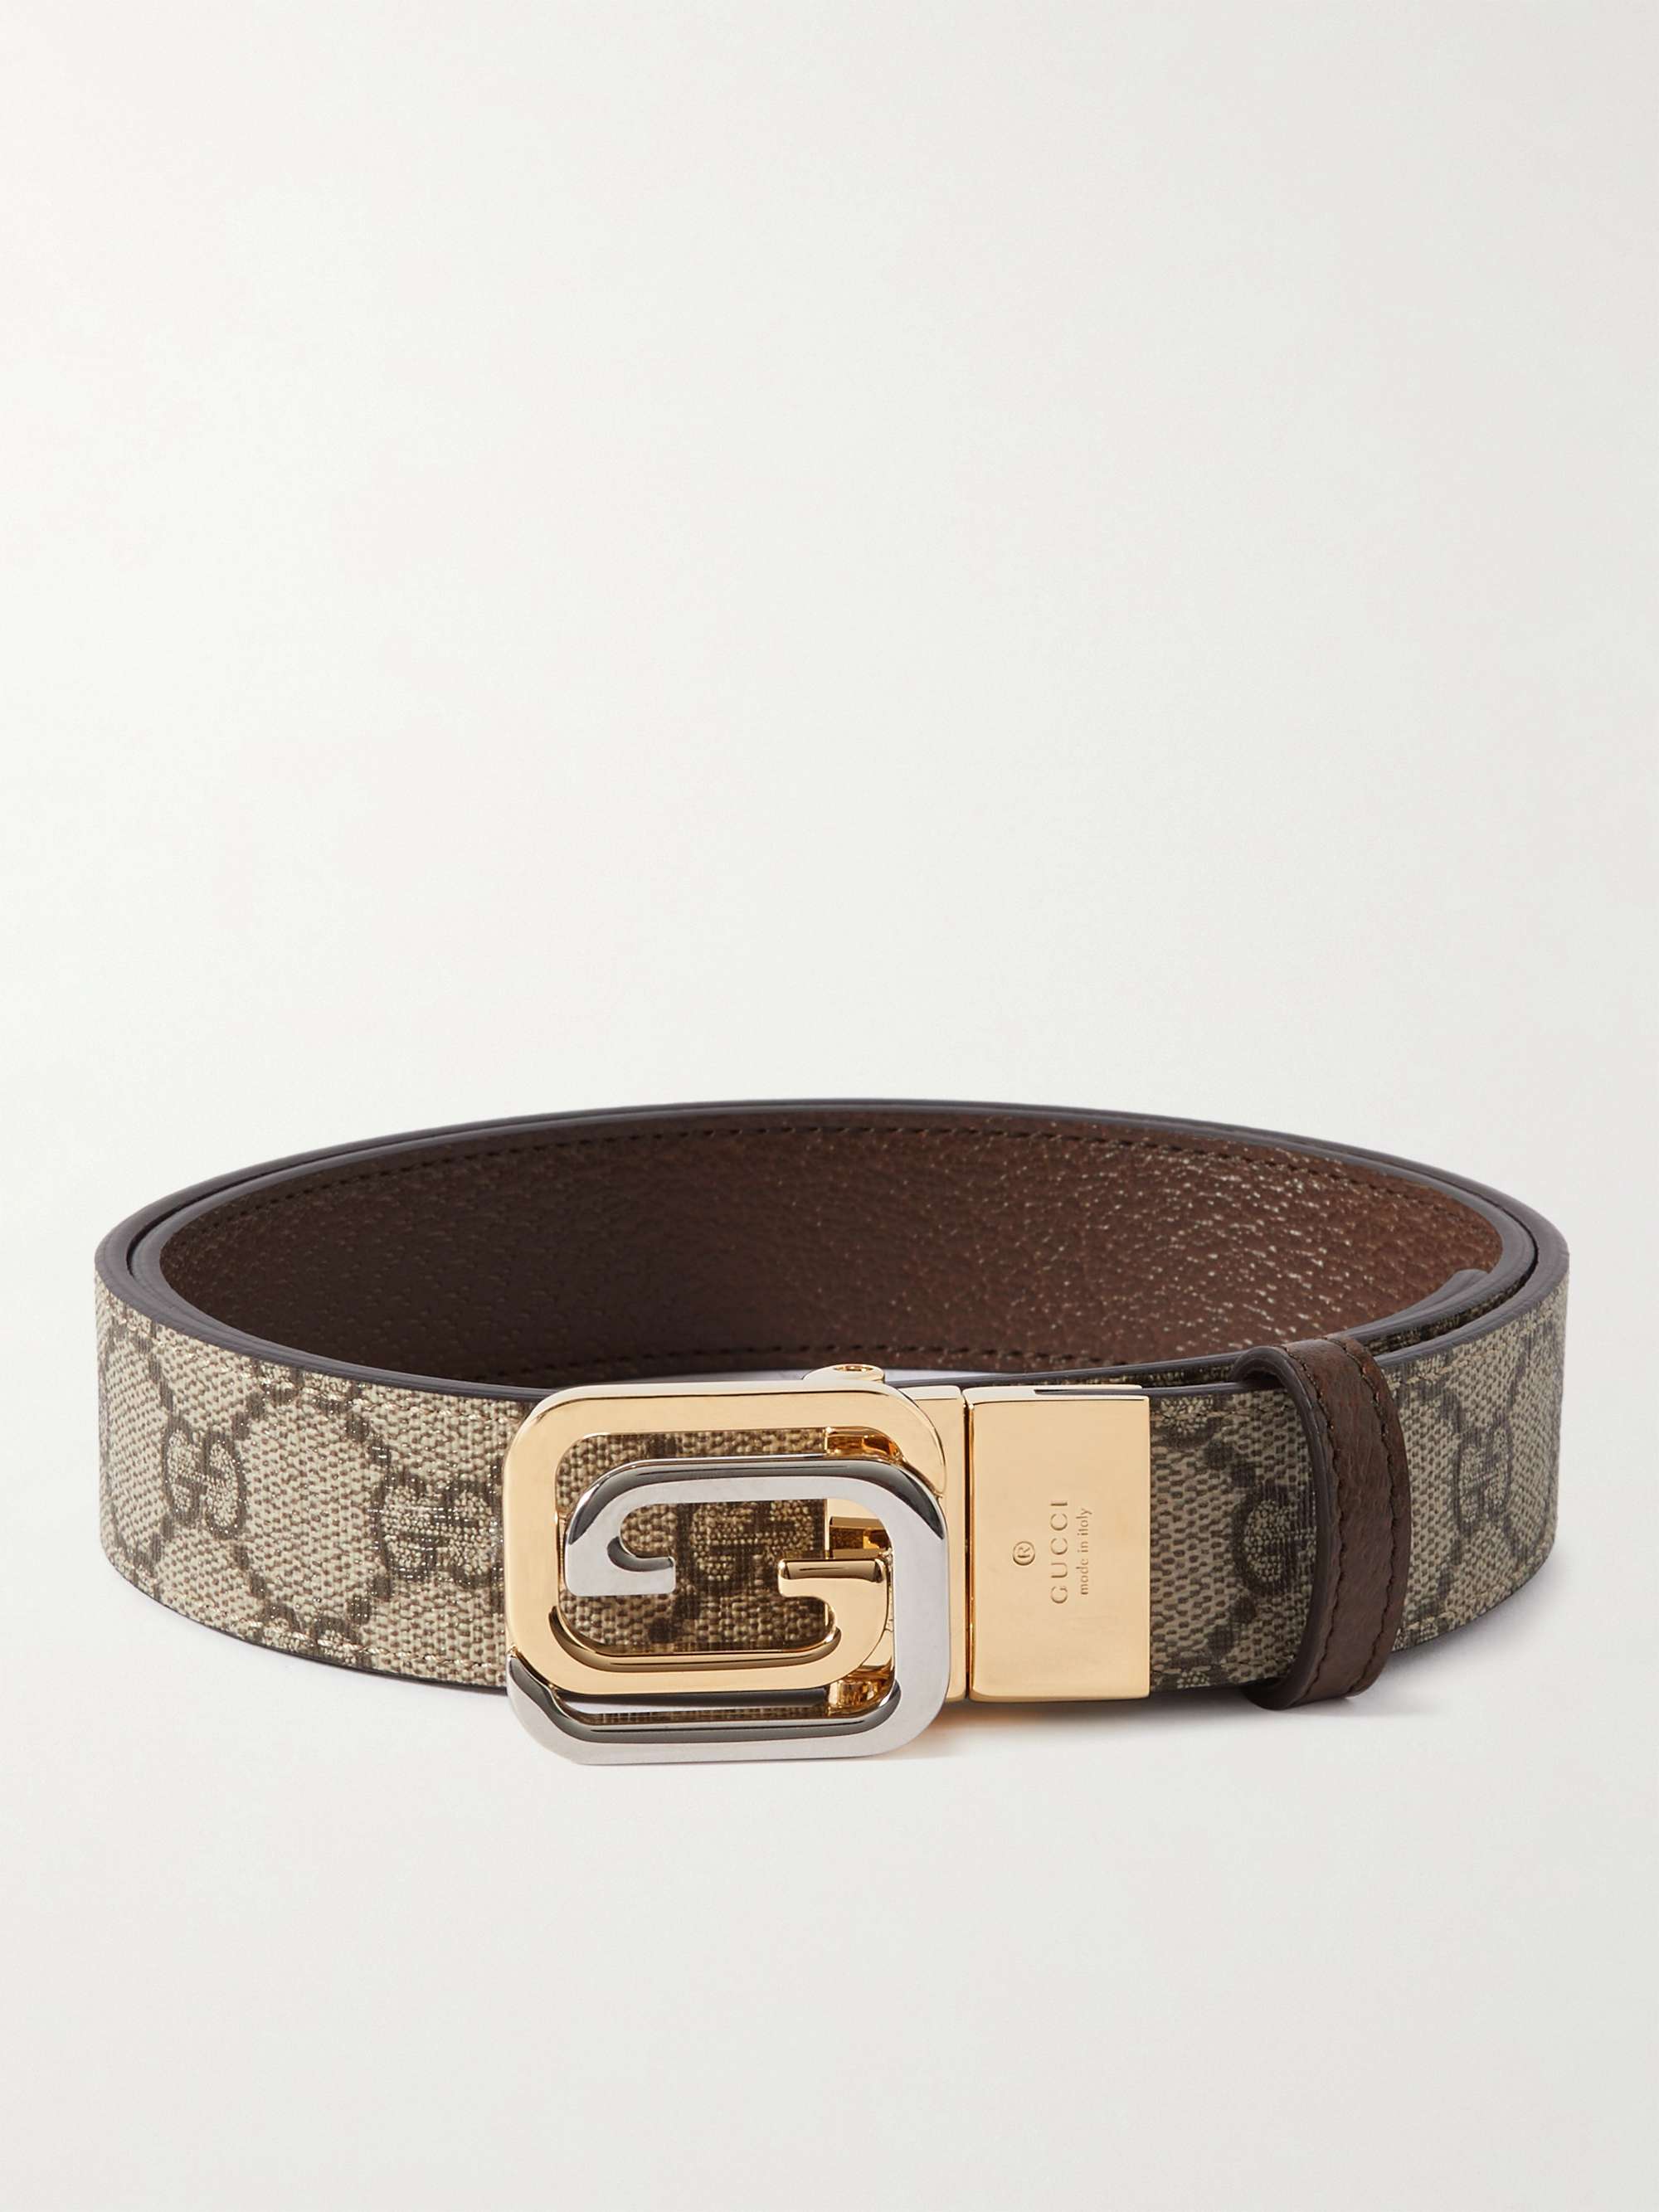 GG Marmont reversible belt in blue and dark blue Supreme